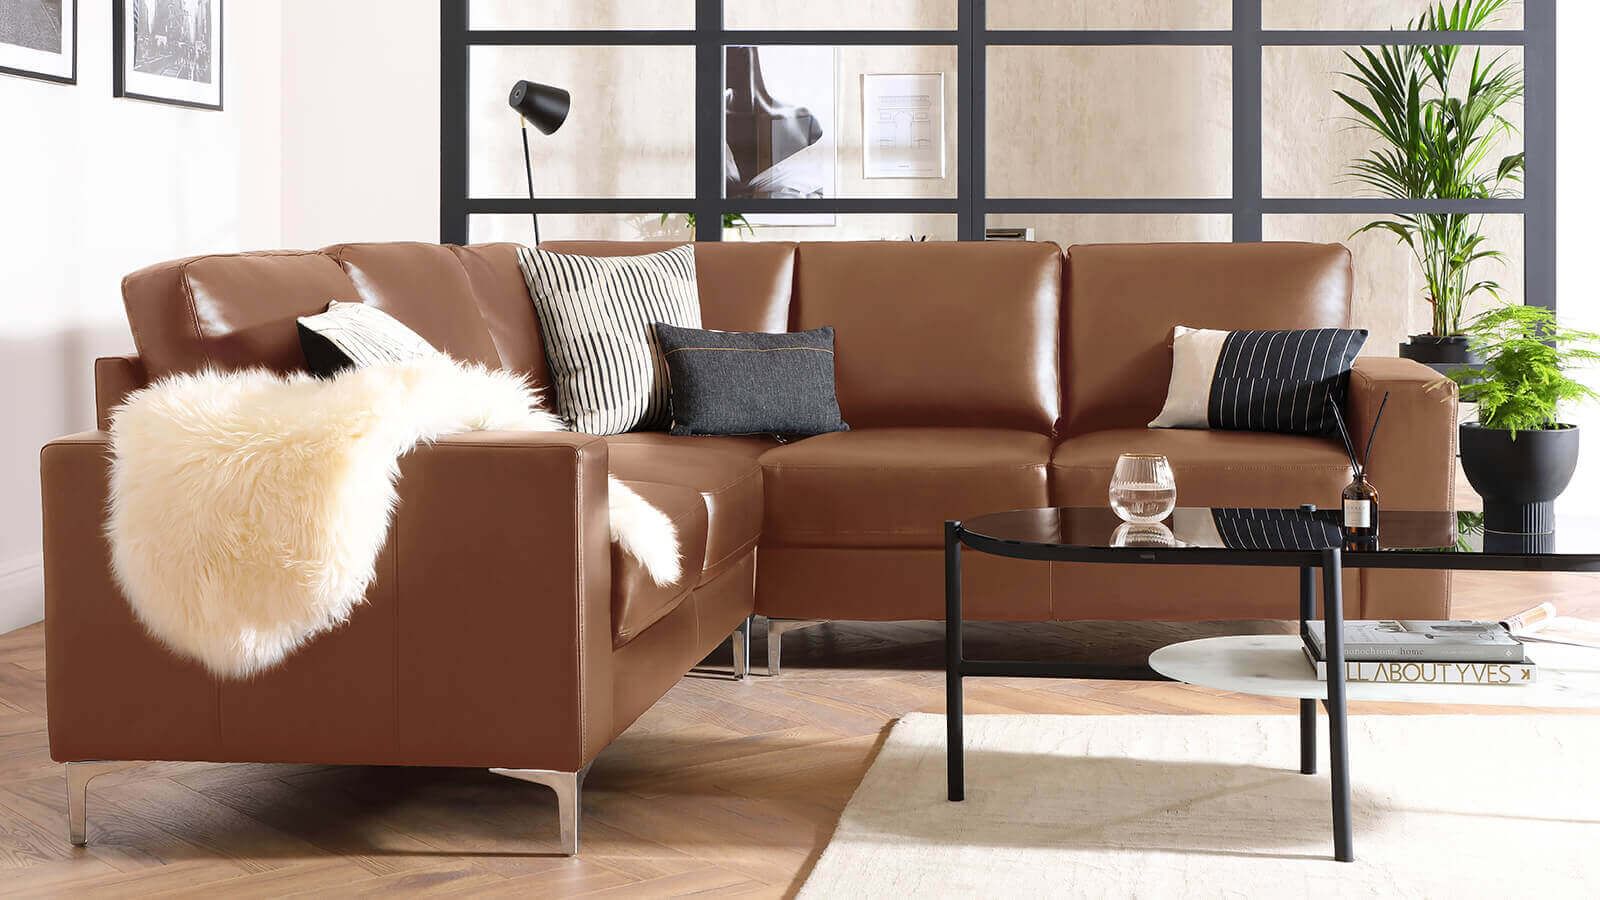 https://www.furniturechoice.co.uk/v5/img/hier/advice-and-inspiration/banner-what-colours-go-with-a-brown-leather-sofa-l.jpg